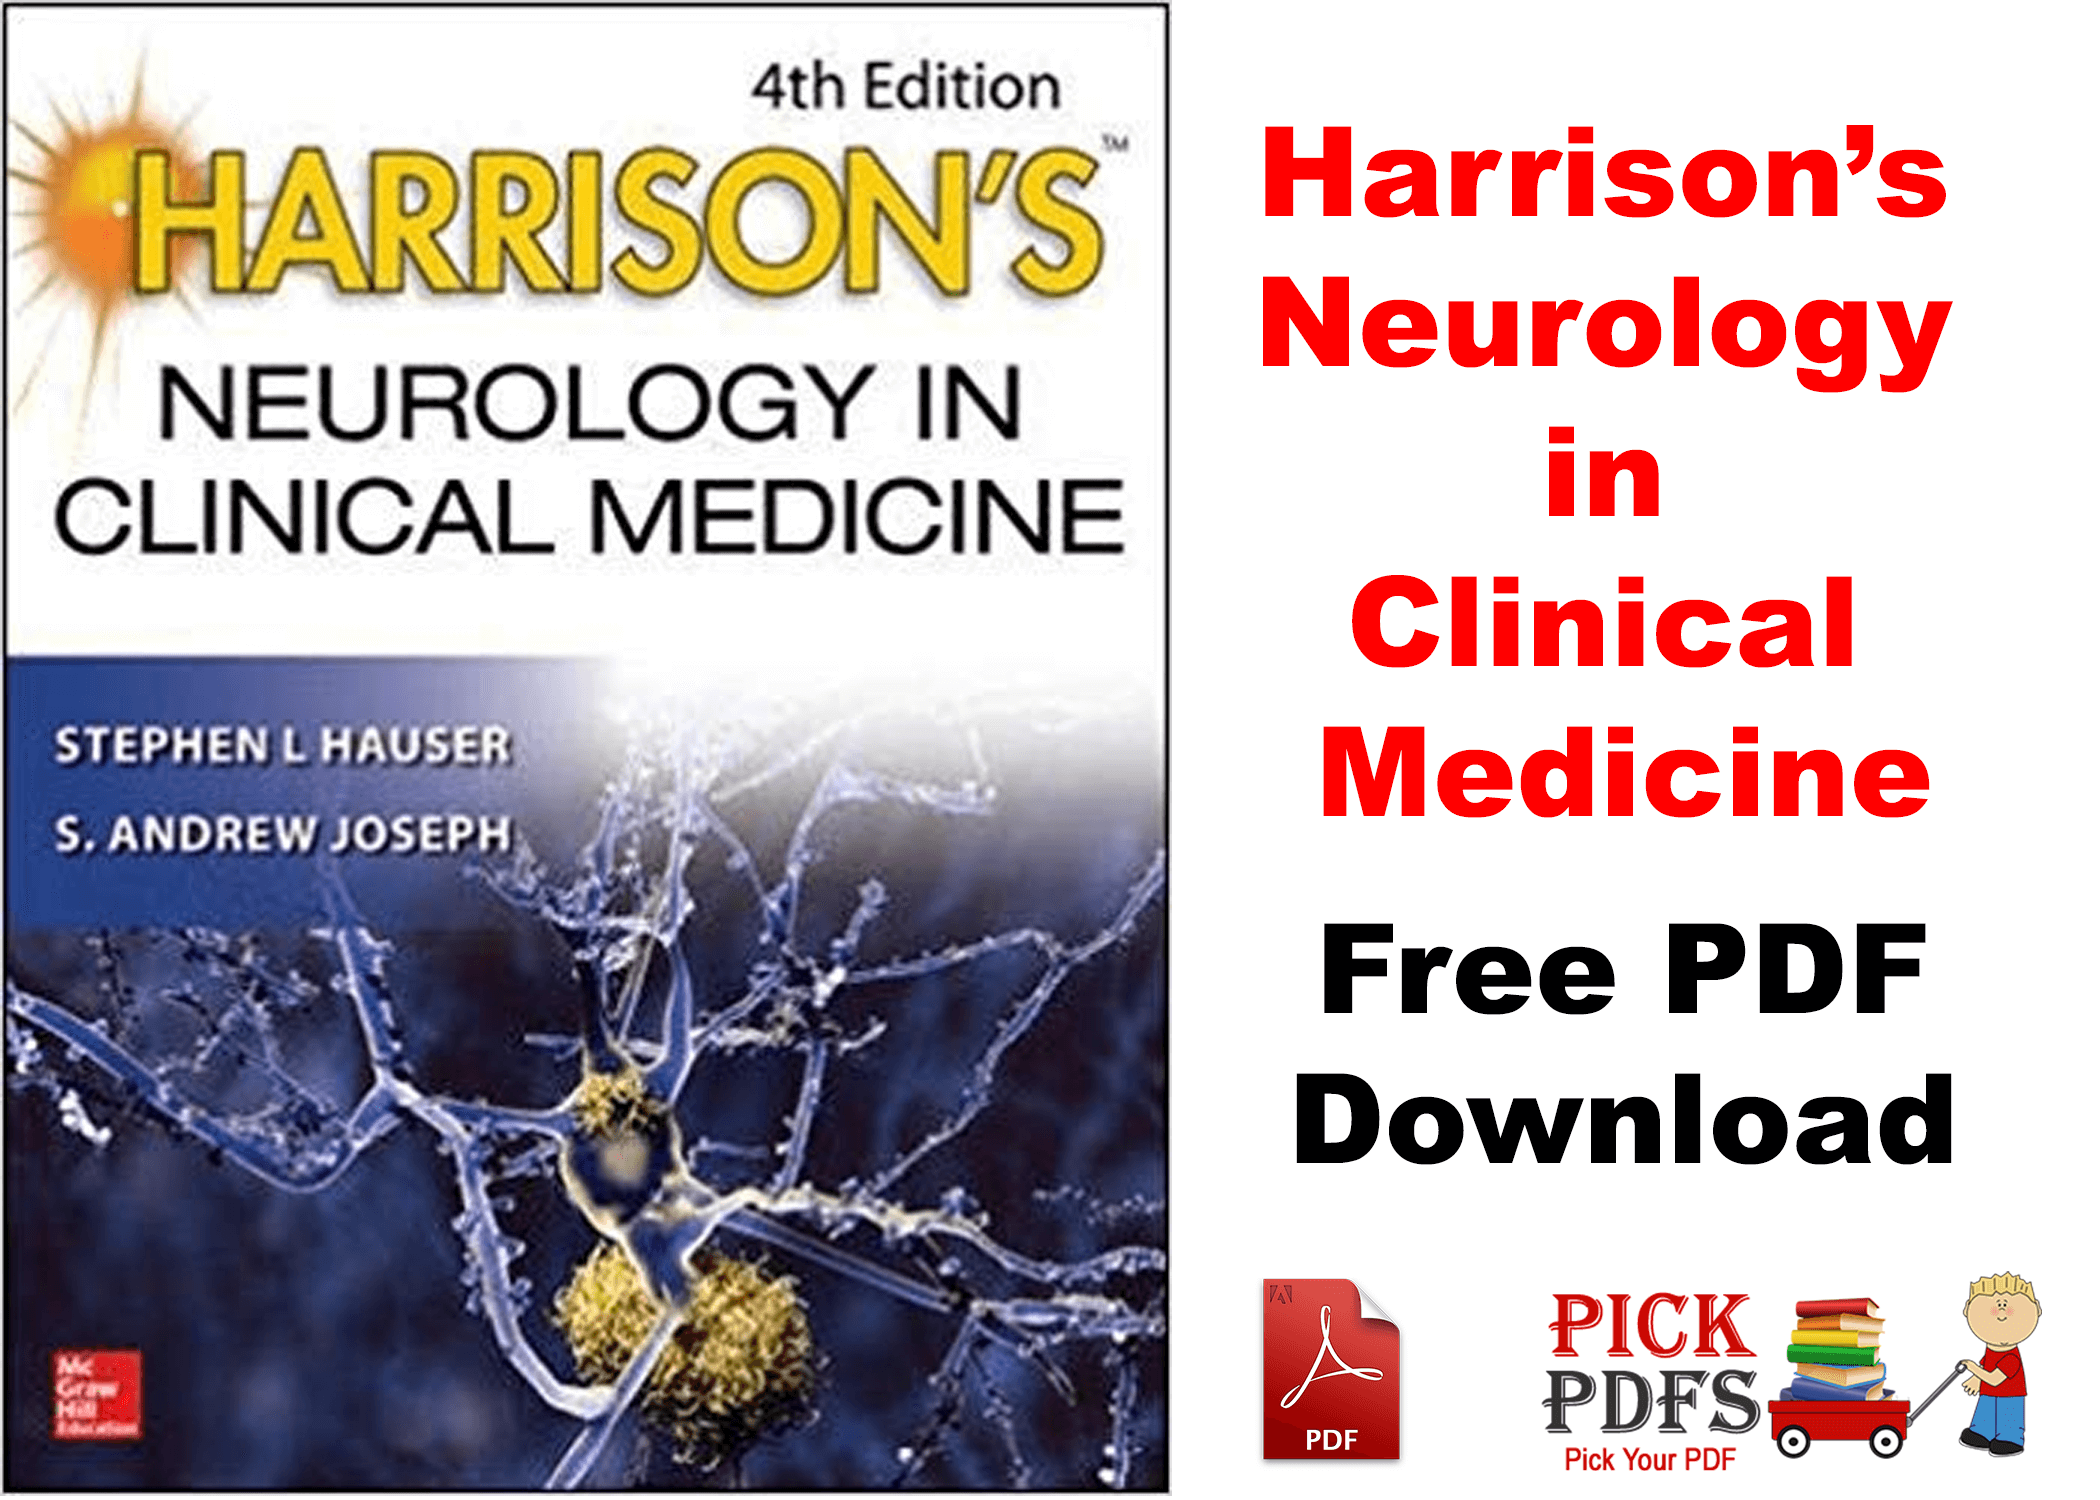 https://pickpdfs.com/download-aicardis-diseases-of-the-nervous-system-in-childhood-pdf-4th-edition-free2021/